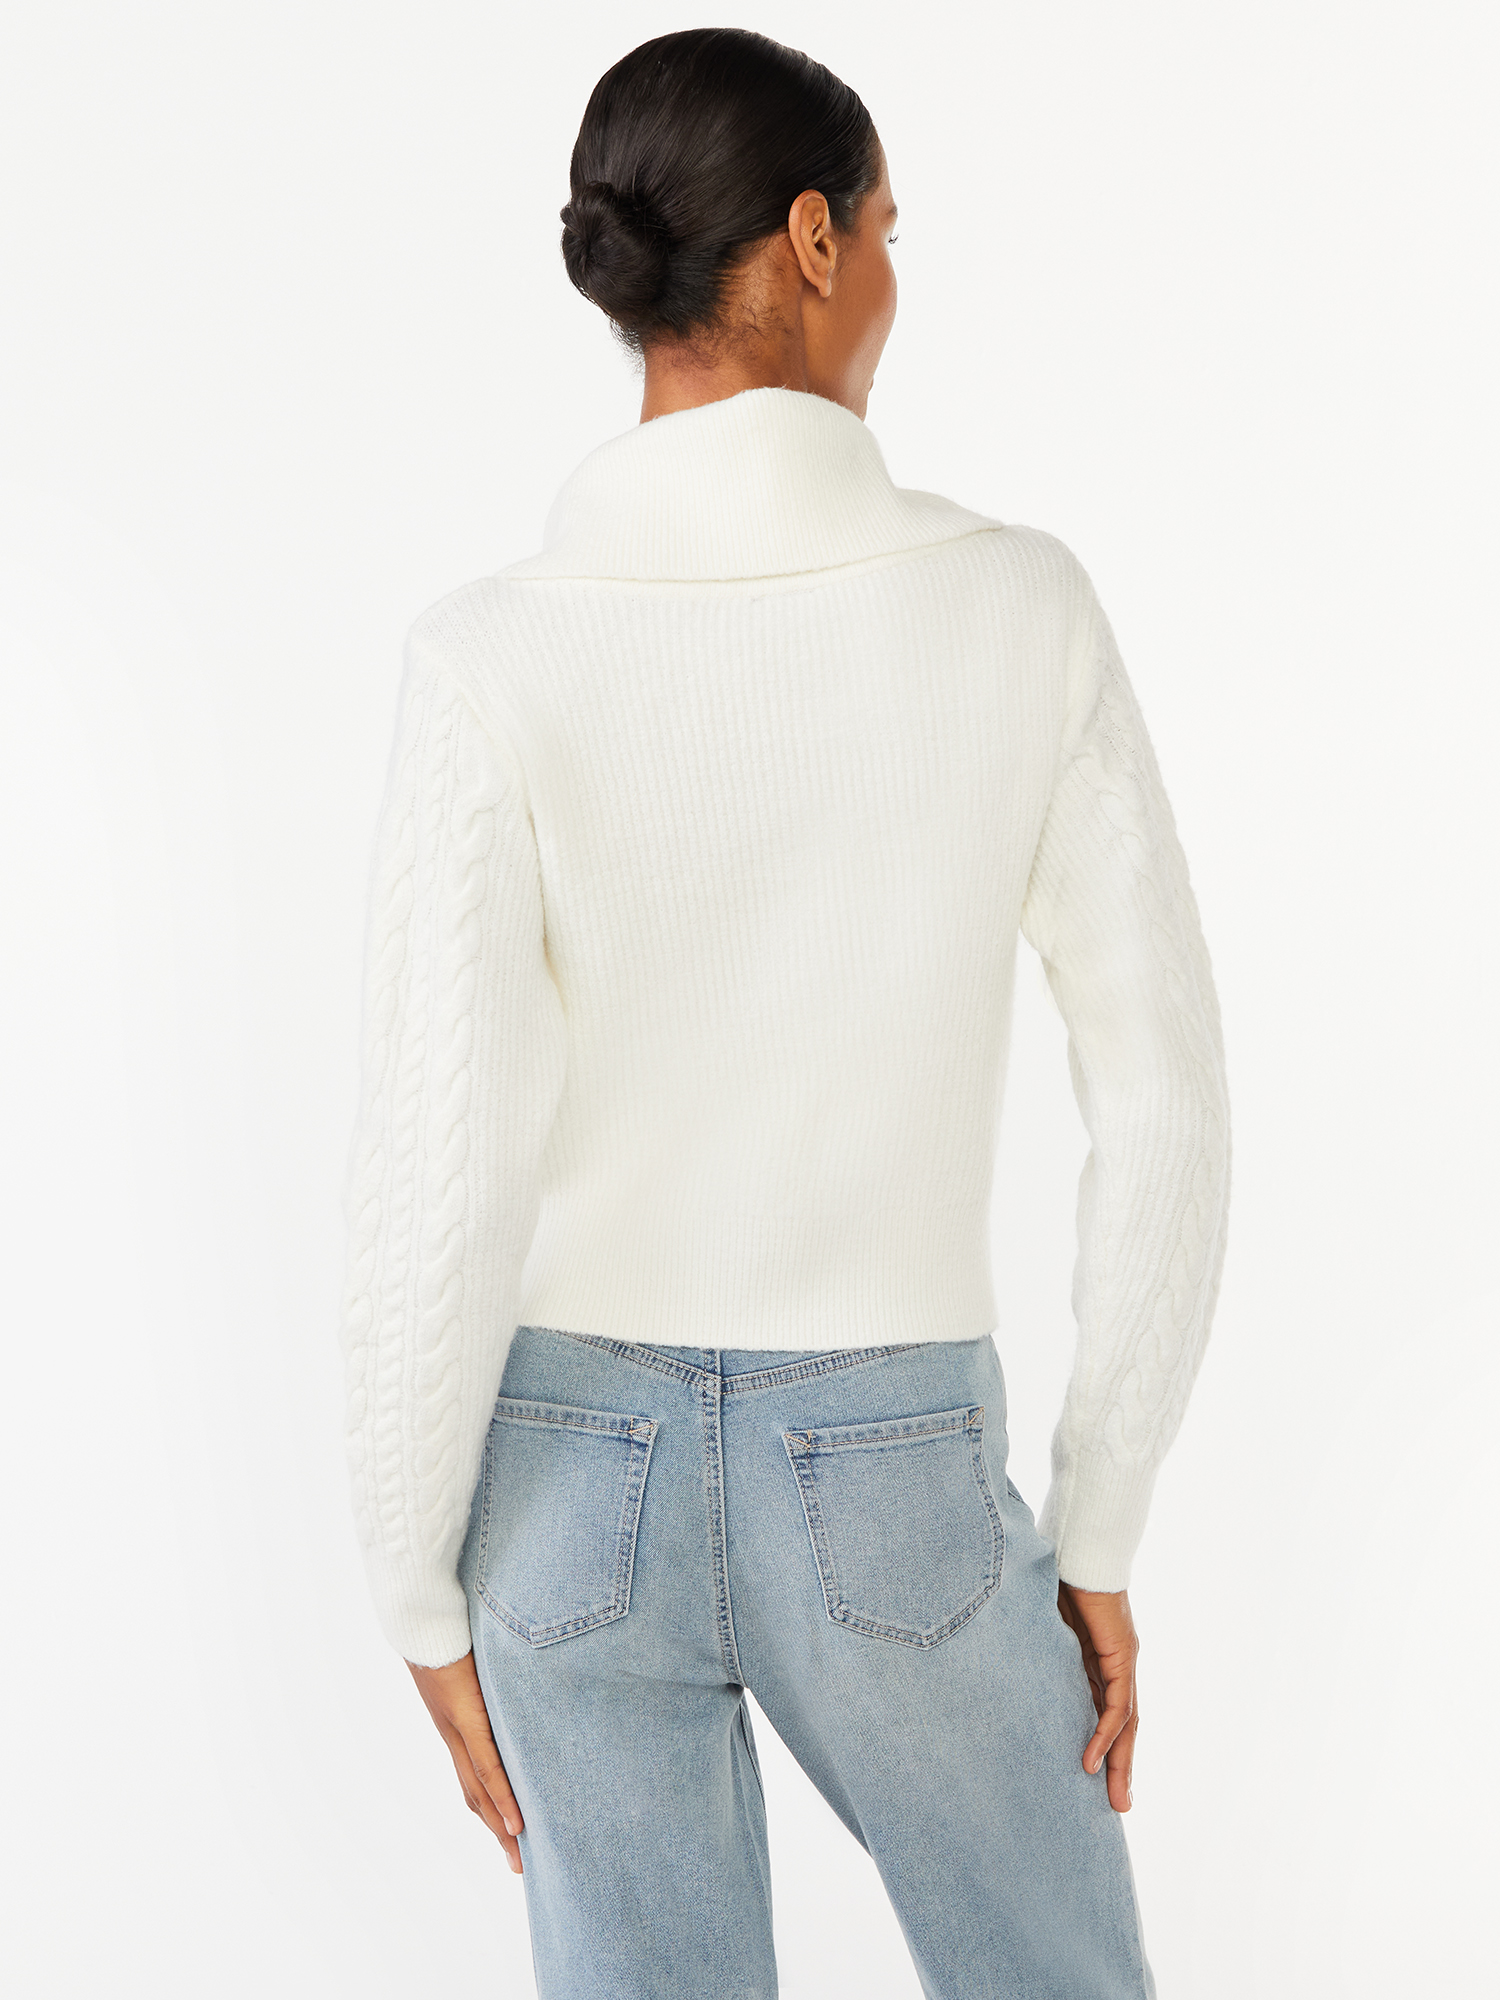 Scoop Women's Zip Front Cable Knit Sweater - image 4 of 5